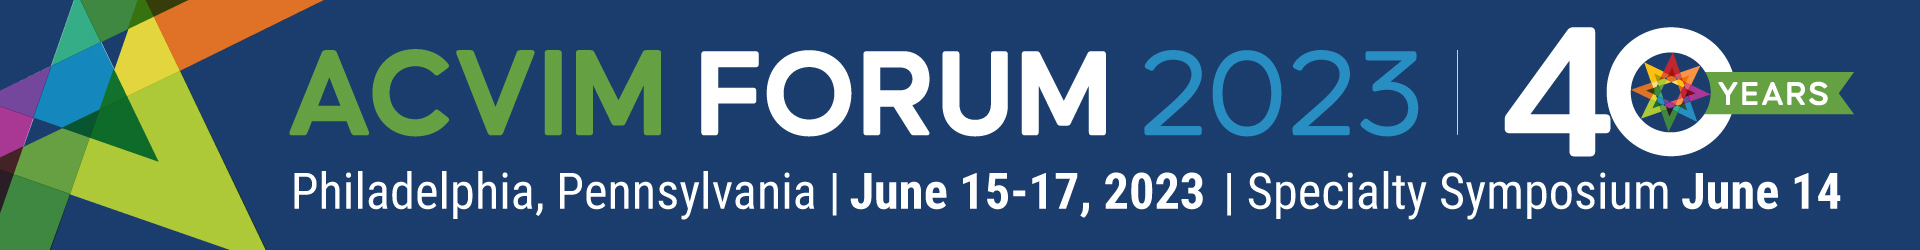 2023 ACVIM Forum Posters Event Banner